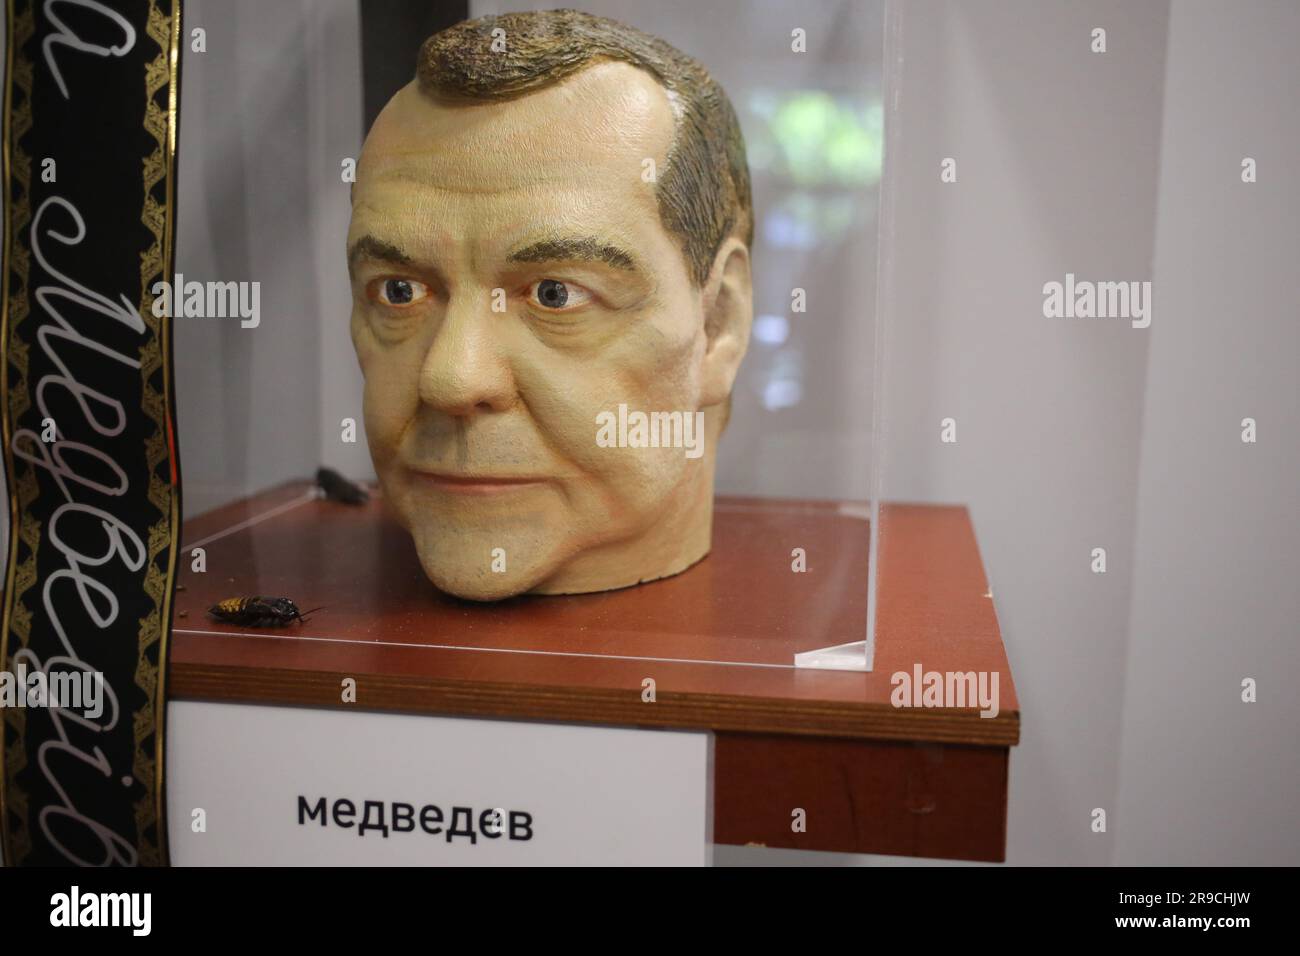 Artificial head of Dmitry Medvedev (Russian statesman and politician) surrounded by Madagascar cockroaches is seen at the exhibition 'Heads' at Uspenskaya 60. Exhibition-performance 'Heads' by Anton Tkachenko opened at Uspenskaya 60. Visitors could look at the artificial heads of the media people of the Russian Federation, surrounded by Madagascar cockroaches, take part in a performance - pour earth into the coffin with Vladimir Putin. The goal is for the visitor to experience disgust for public figures of the Russian Federation. Exhibition-performance 'Heads' by Anton Tkachenko opened at Uspe Stock Photo